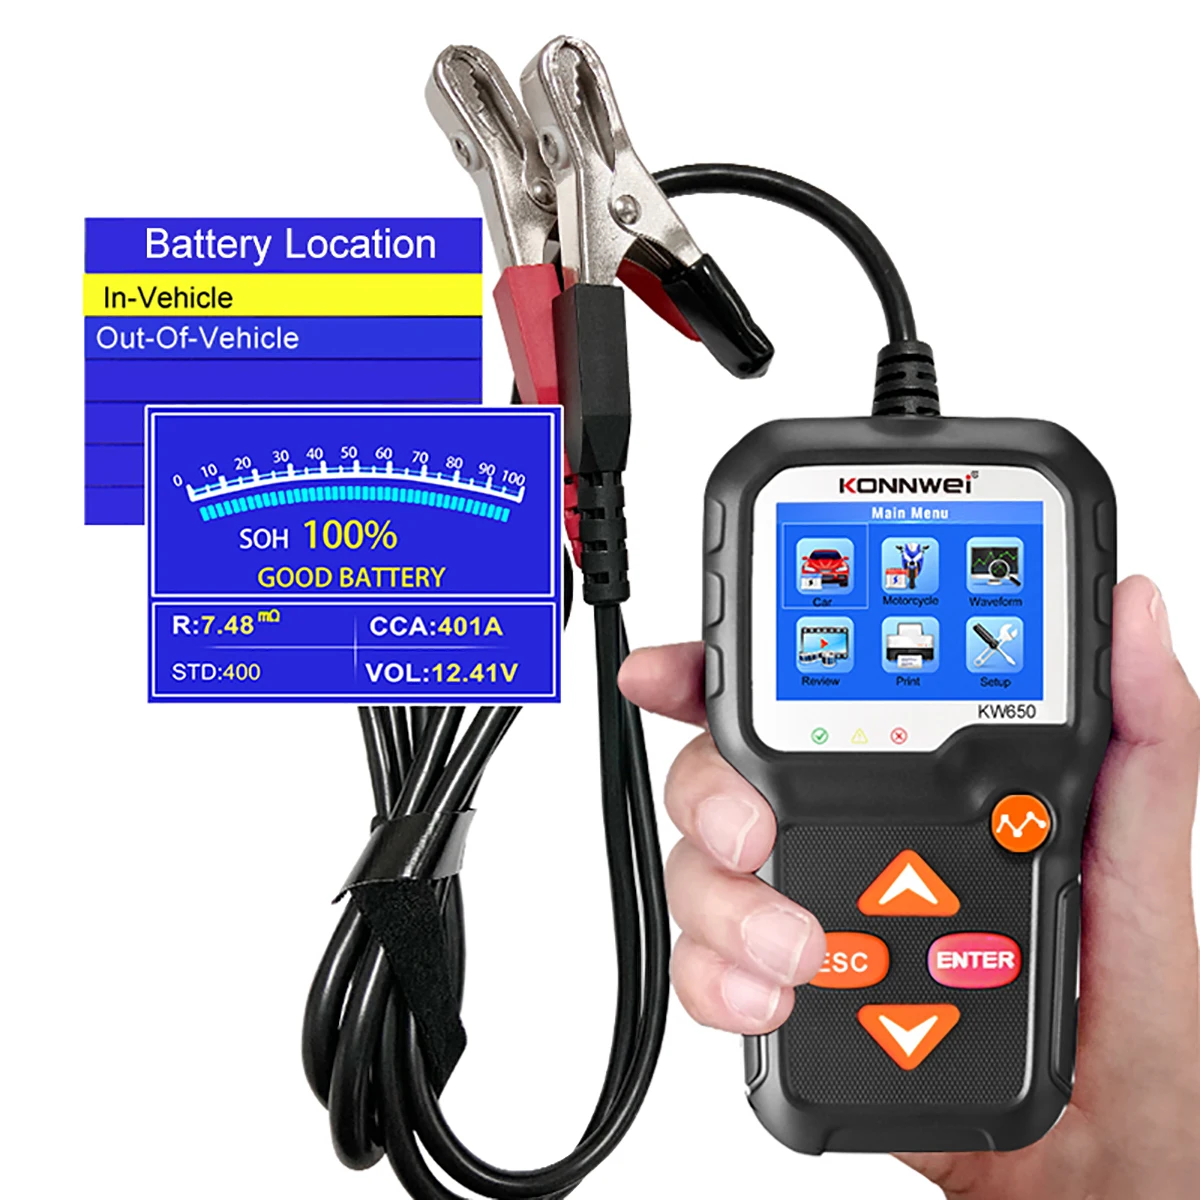 

KONNWEI KW650 Car Motorcycle 12V 6V Lead-Acid Battery Tester 100 to 2000 CCA System Auto Analyzer Quick Charging Cranking Tools